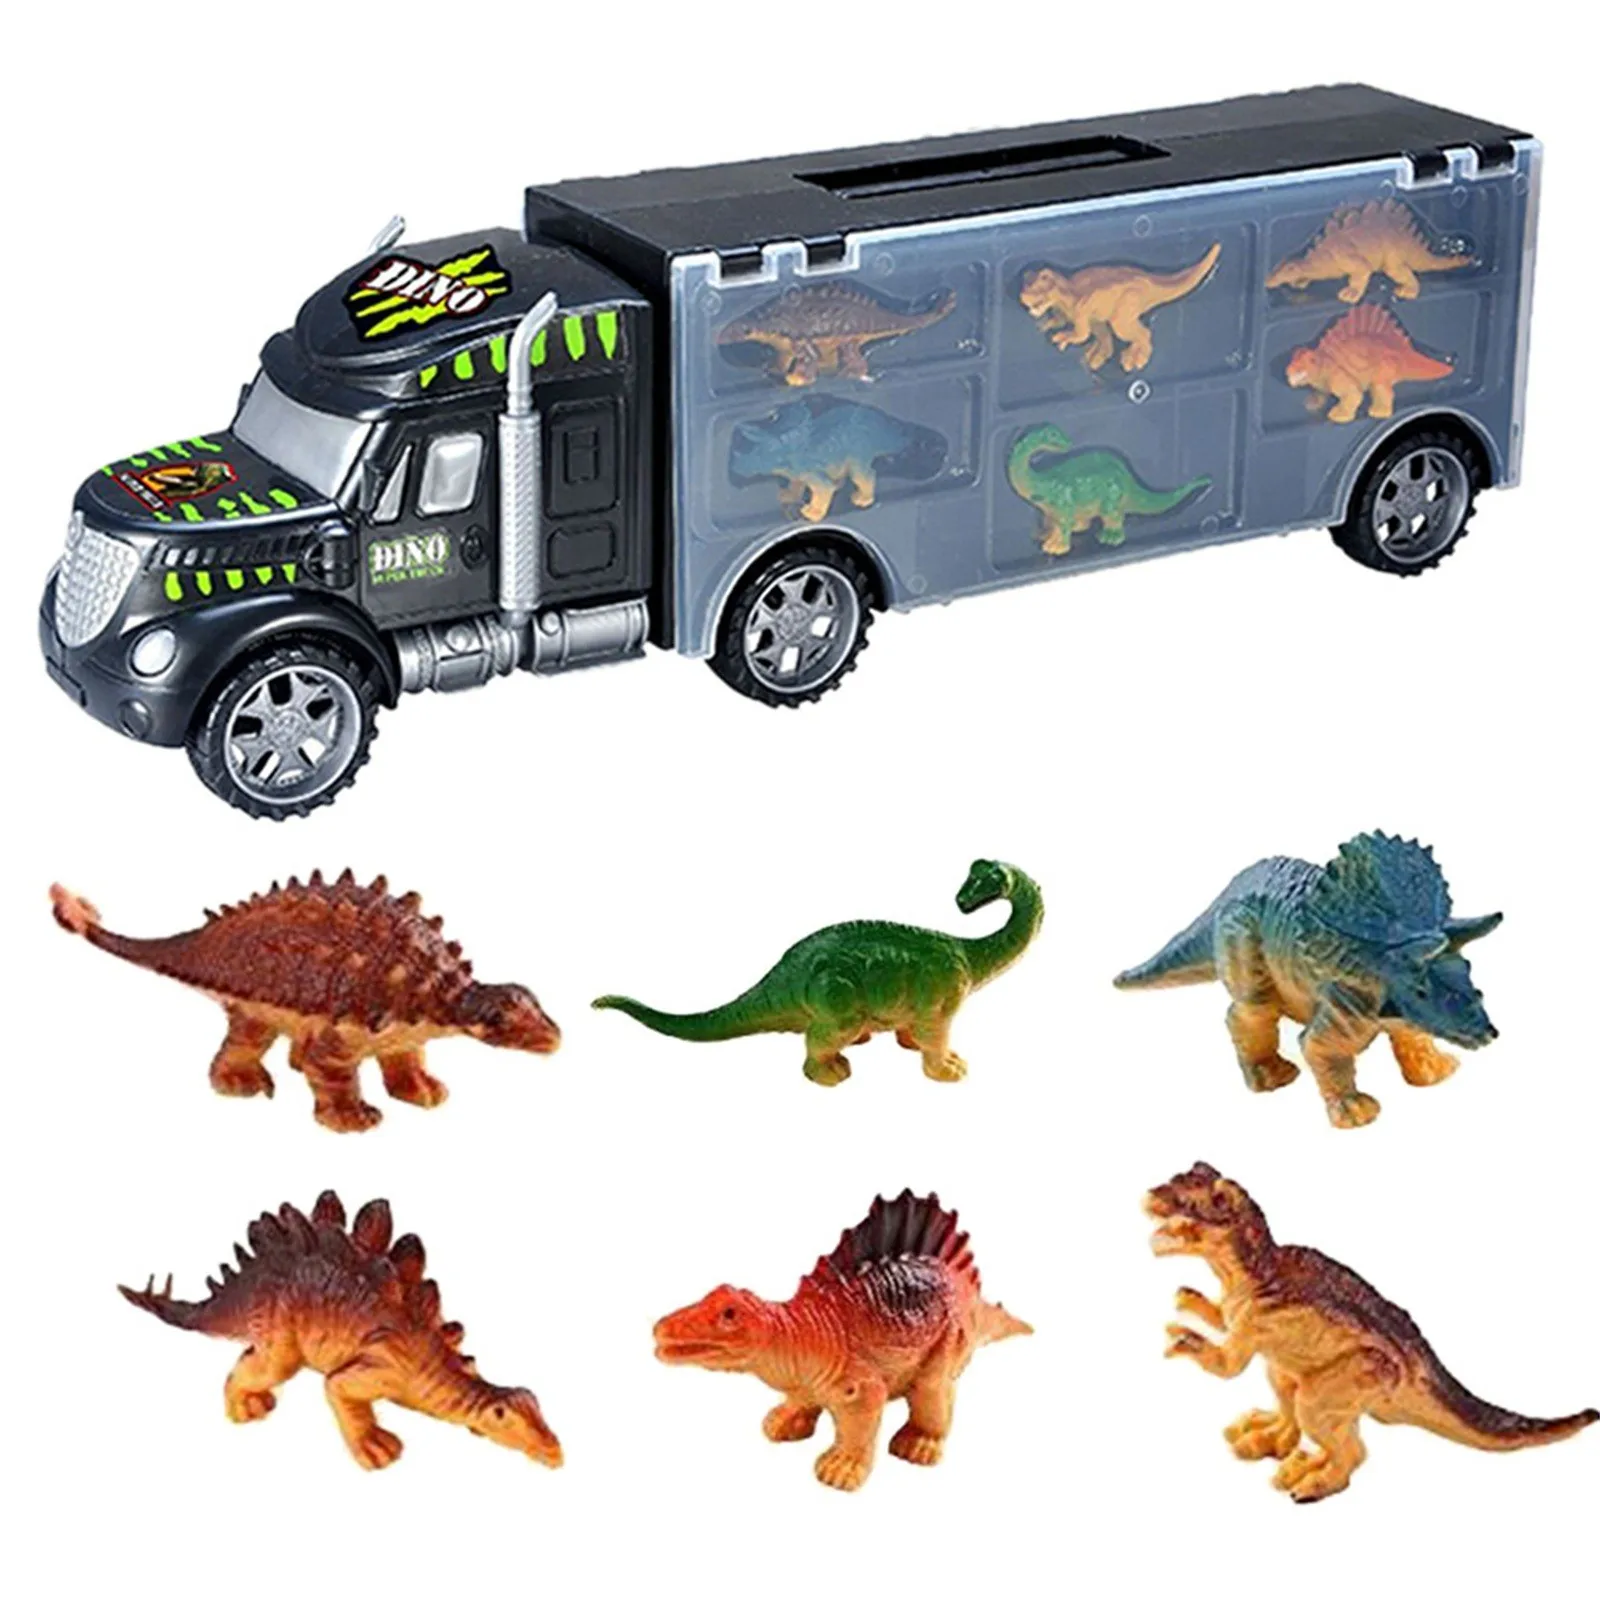 

Car Toy Dinosaurs Transport Car Dinosaur Carrier Truck Toy Indominus Rex Jurassic World Dinosaurs Toys Christmas Gifts For Kids